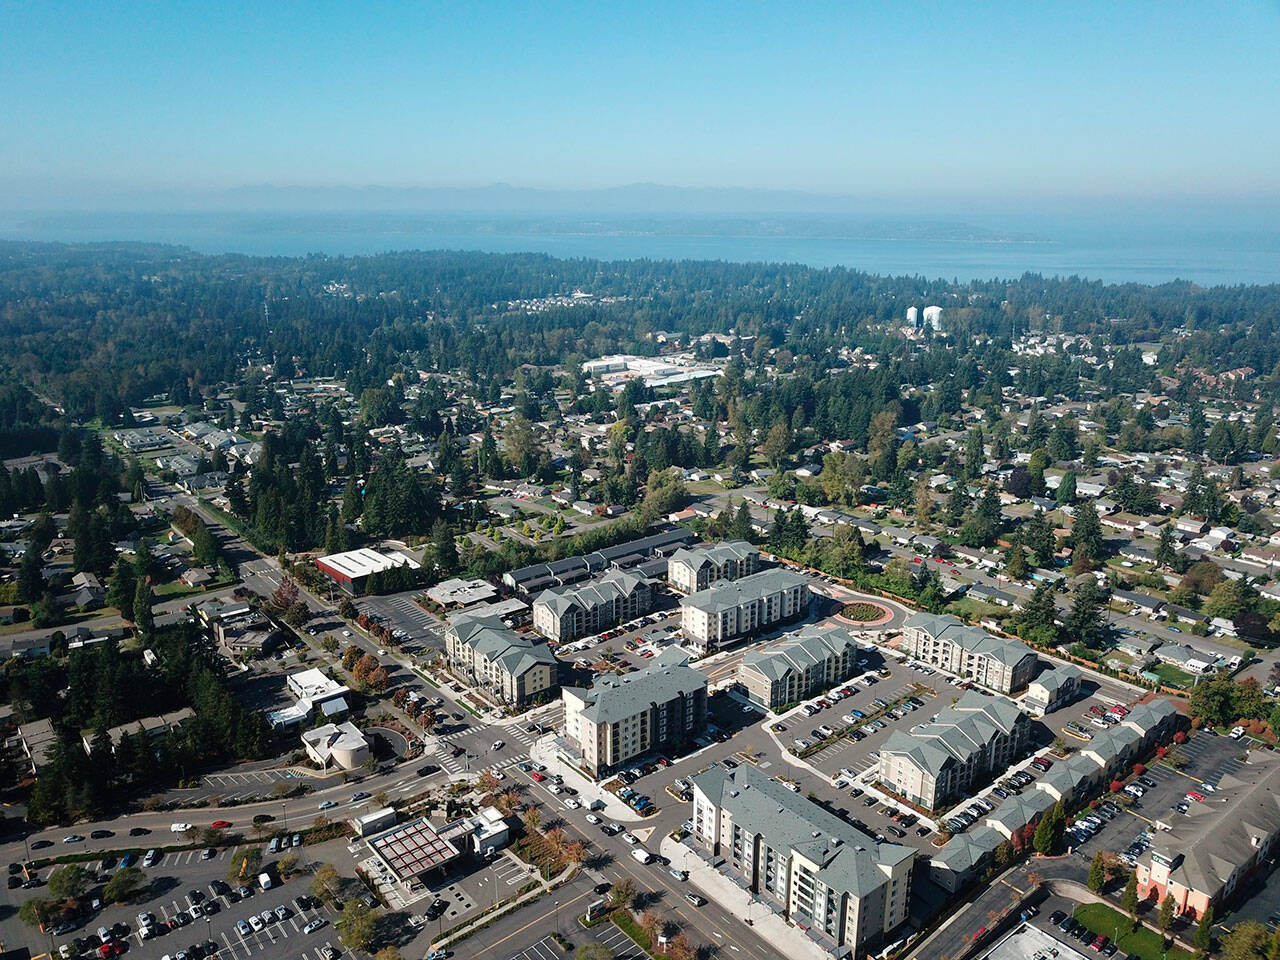 Washington faces a housing shortage, needing more than 1 million homes in the next 20 years to meet the demand, according to the Department of Commerce. Pictured: Bird’s eye view of apartments and single-family homes in Federal Way, Washington. (Photo courtesy of Bruce Honda)